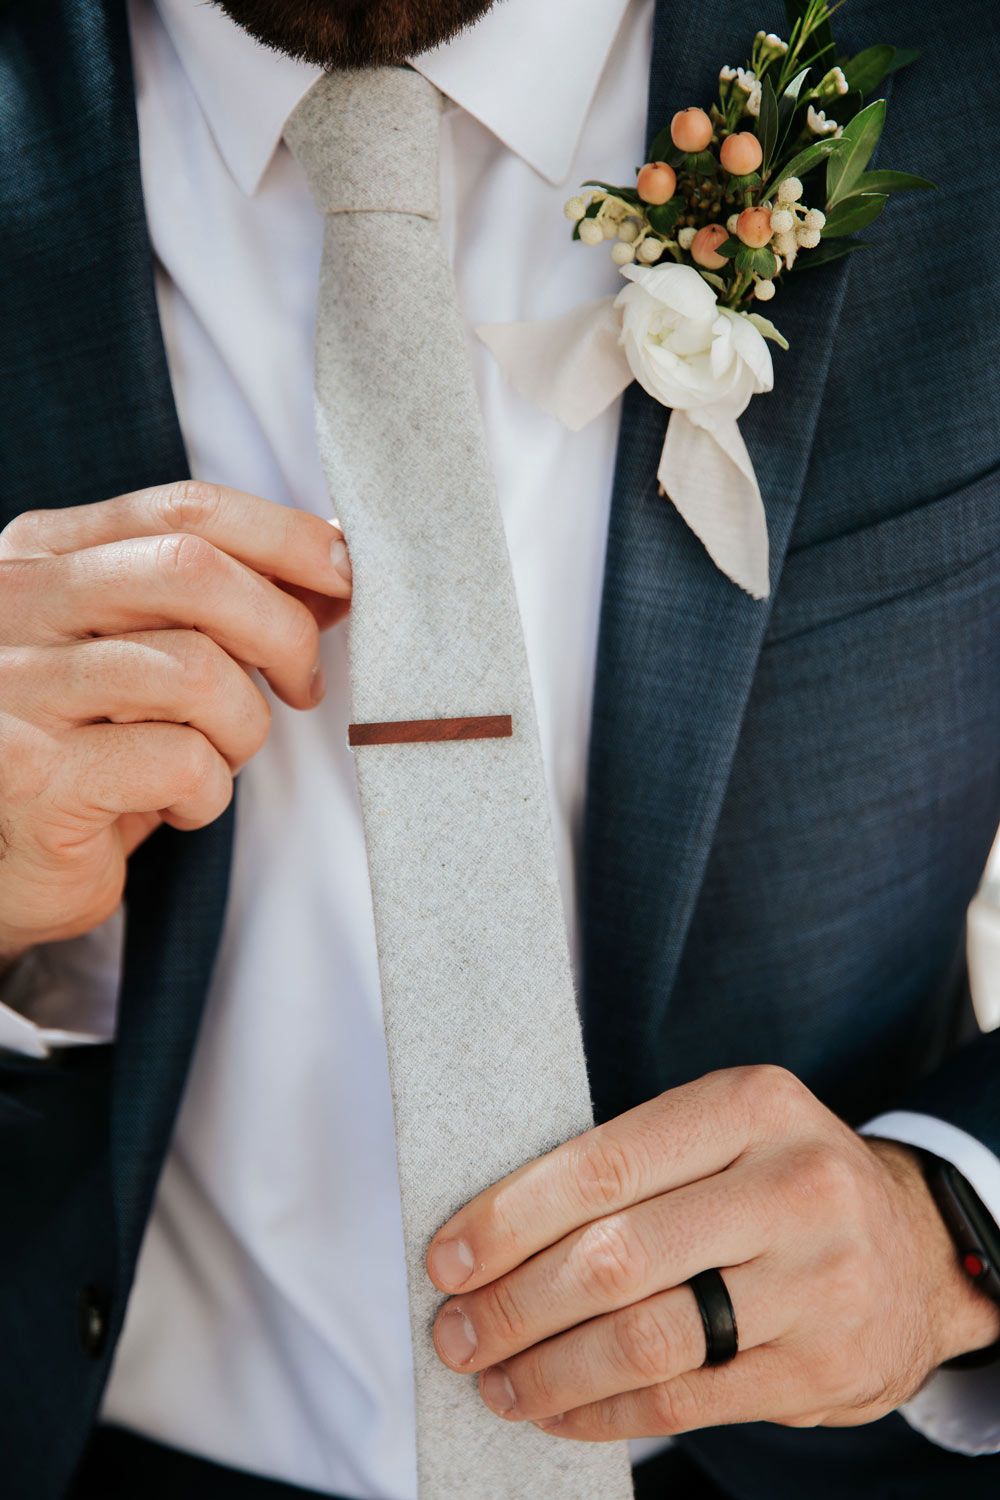 Onyx tie worn with a white shirt and blue suit and a wood tie clip.